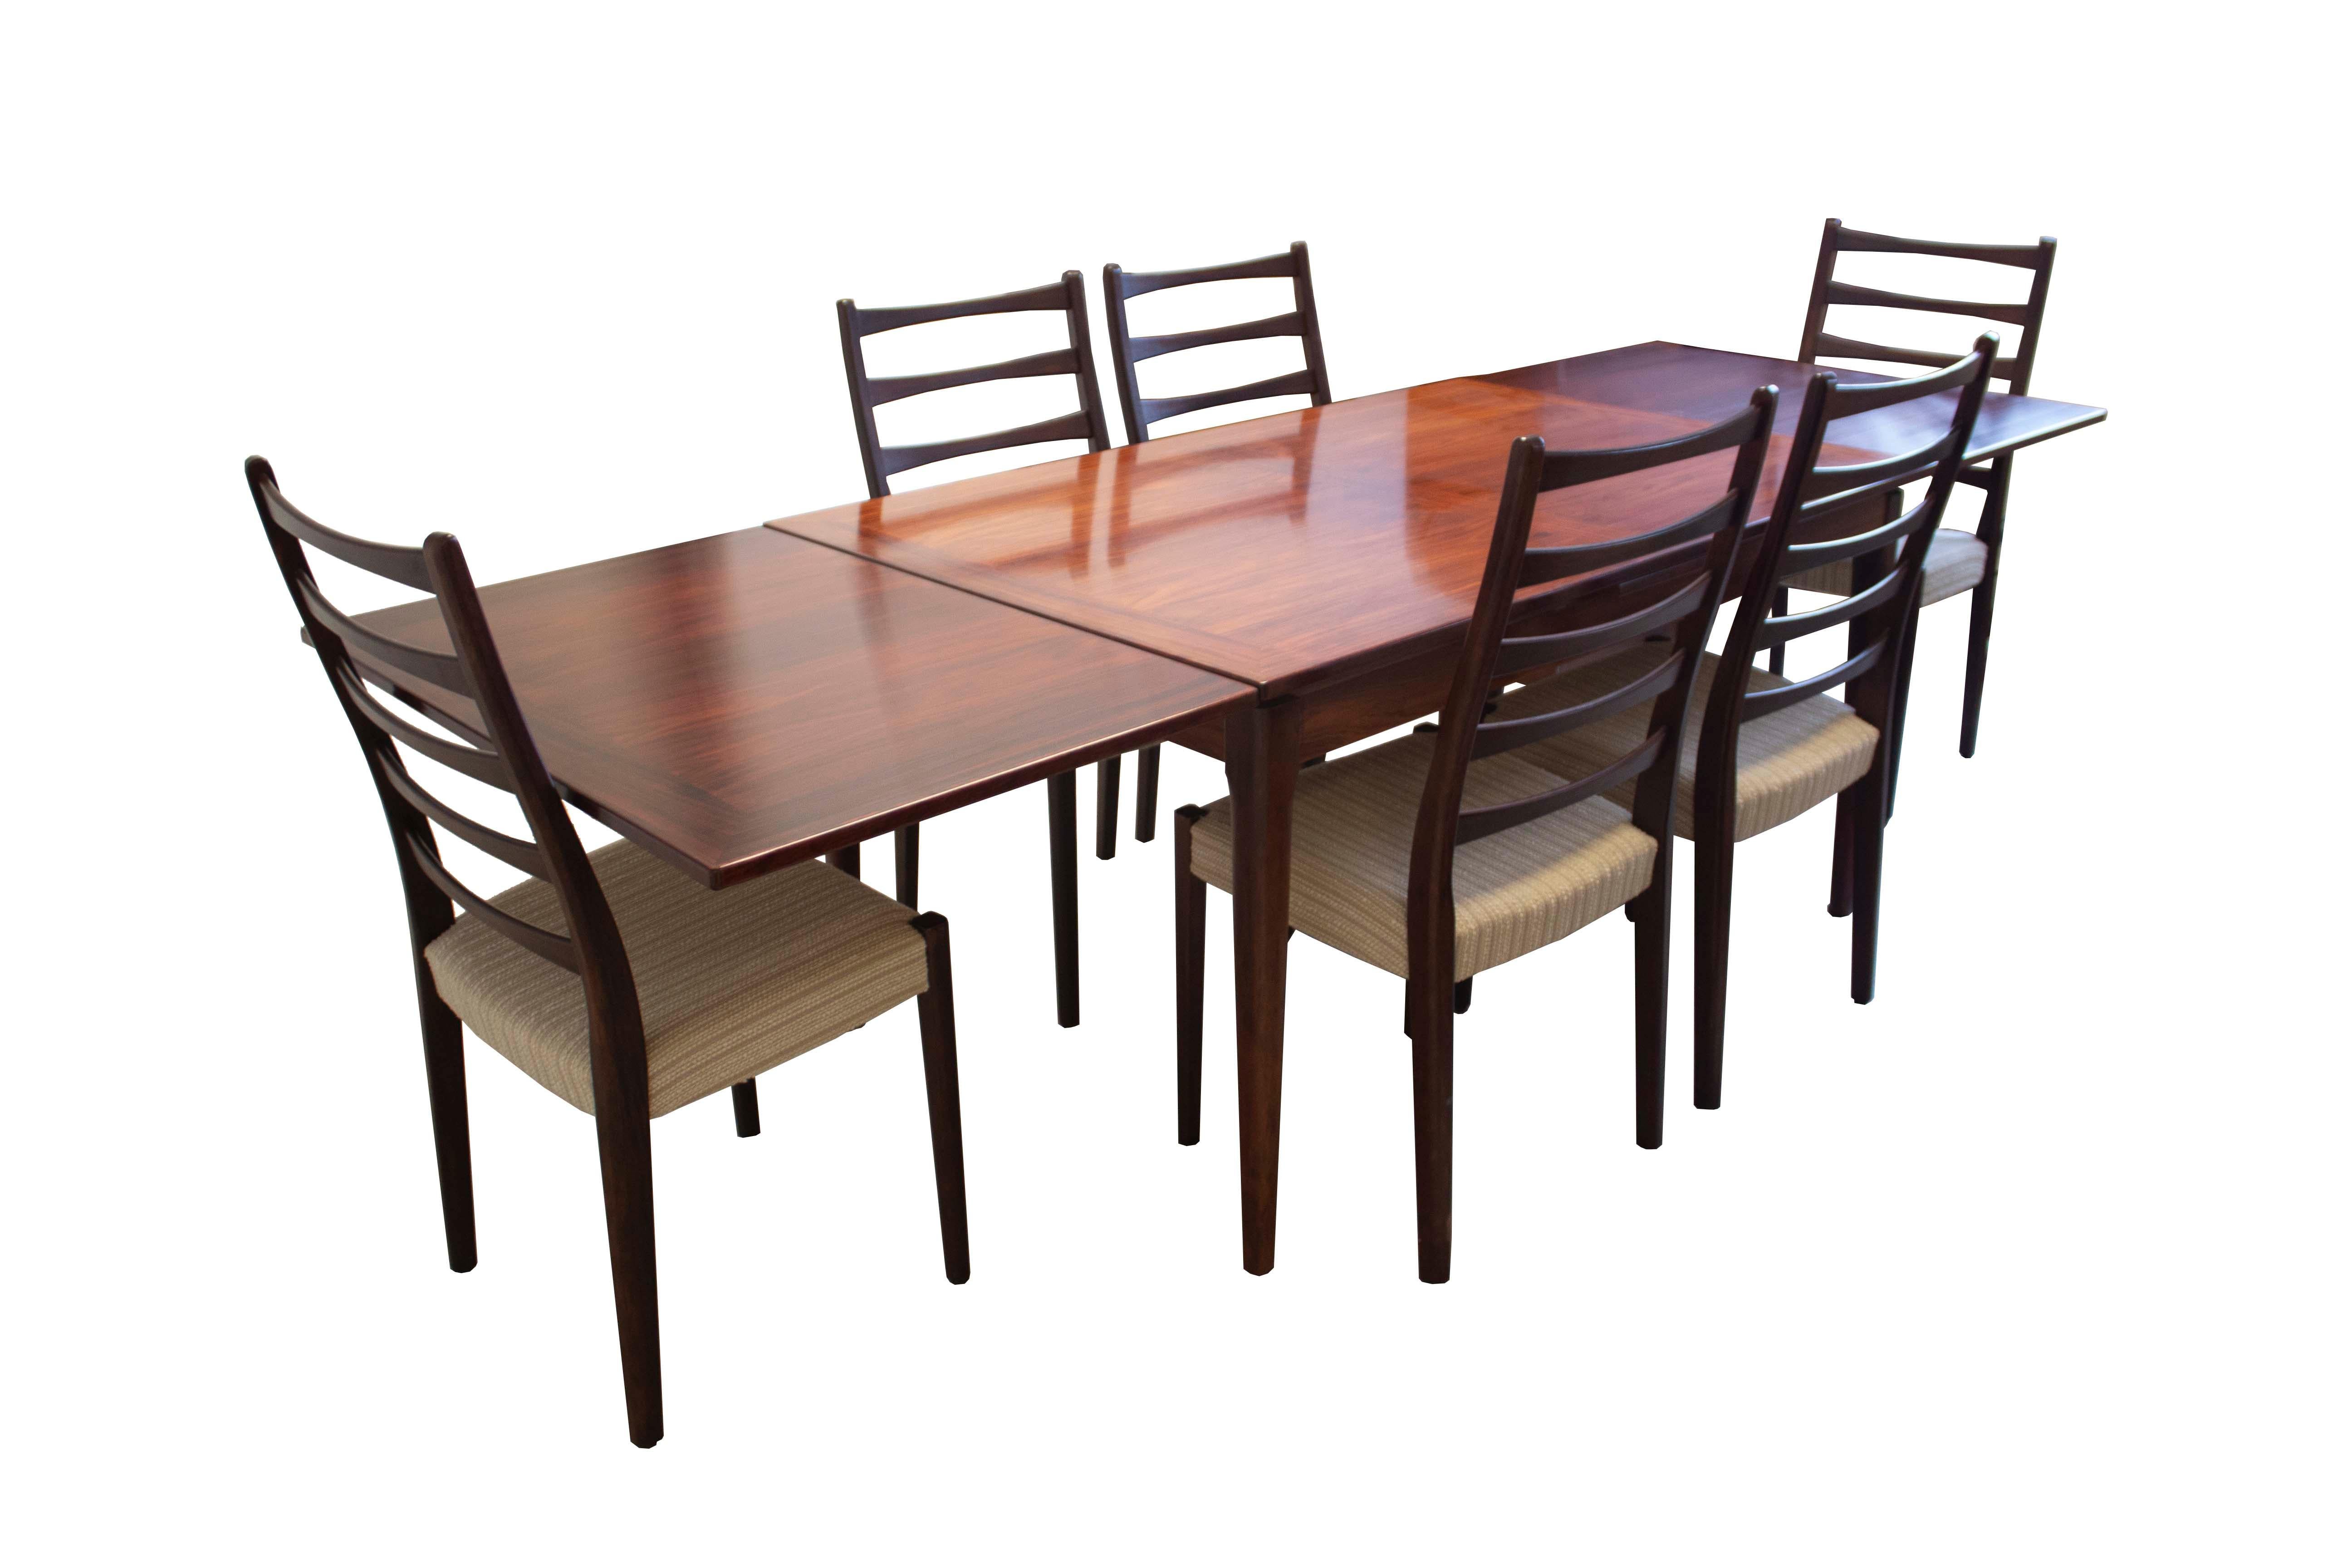 Stunning set of six dining chairs and rosewood table with two (2) self-storing leaves by Svegards Markaryd, circa 1970's. The clean modern lines will work well with most aesthetics as well as the neutral creme boucle upholstery. The finish shows